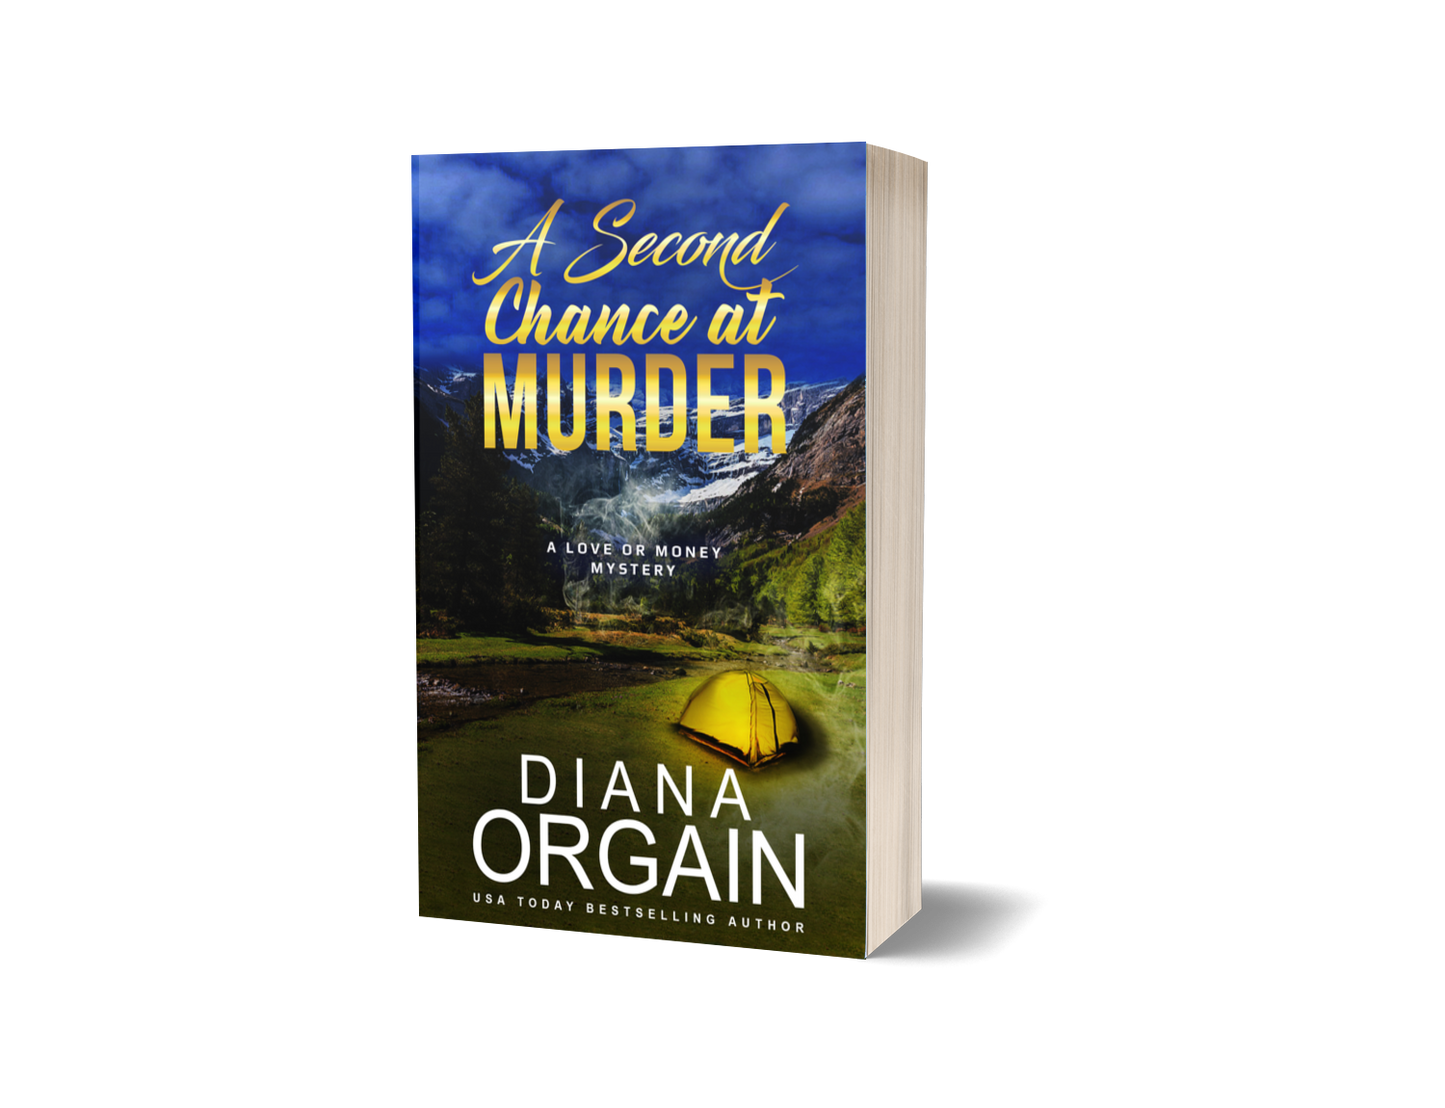 A Second Chance at Murder (Book 2 in the Love or Money Mystery Series) PRINT EDITION - Diana Orgain